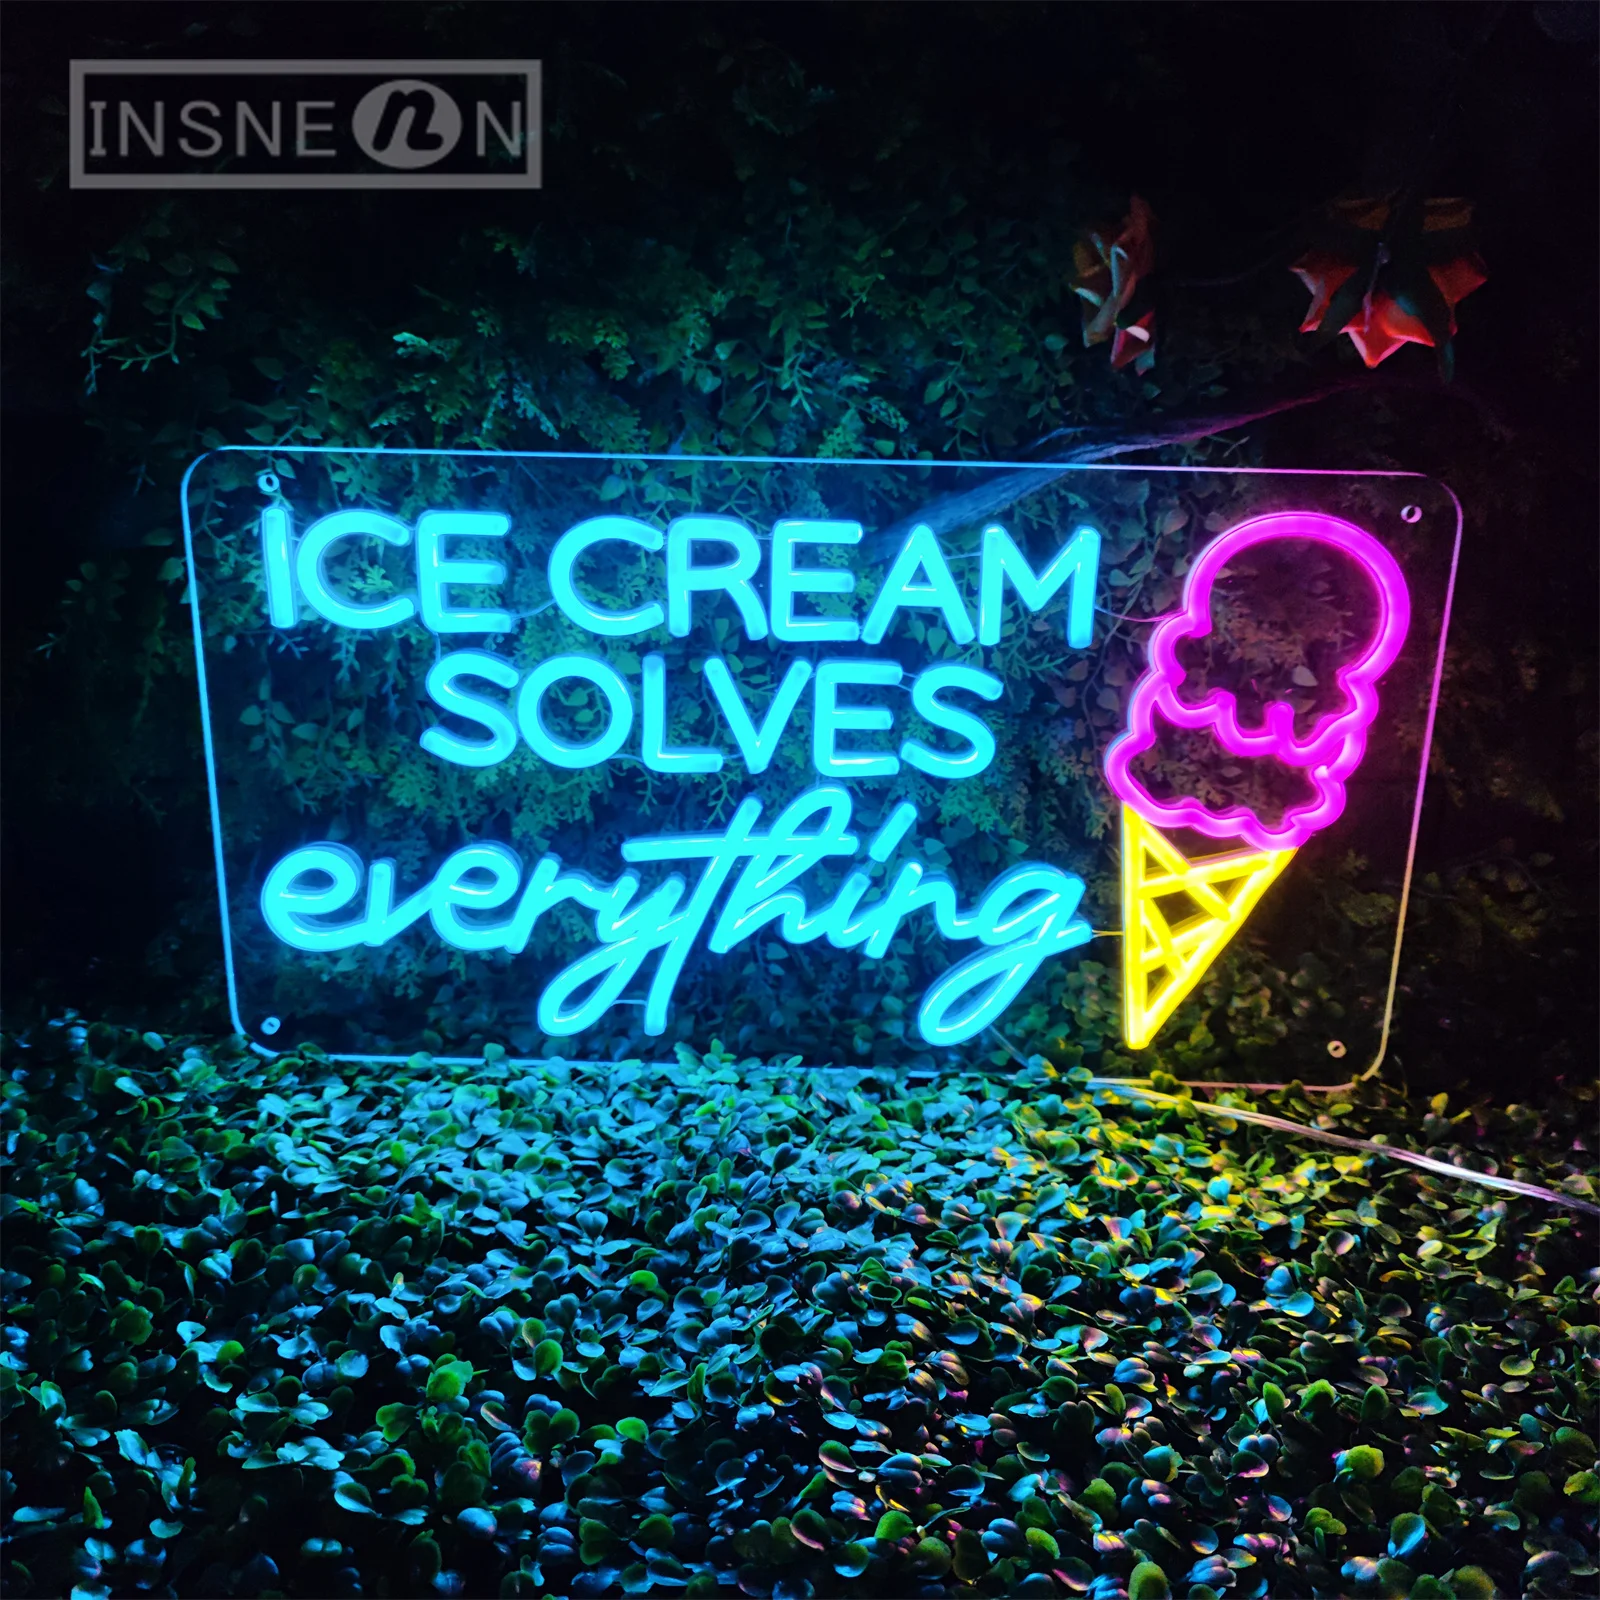 

Neon Sign Light Ice Cream Solves Everything for Shop Store Restaurant Business Advertising Neon Lights Ice Cream LED Signboard